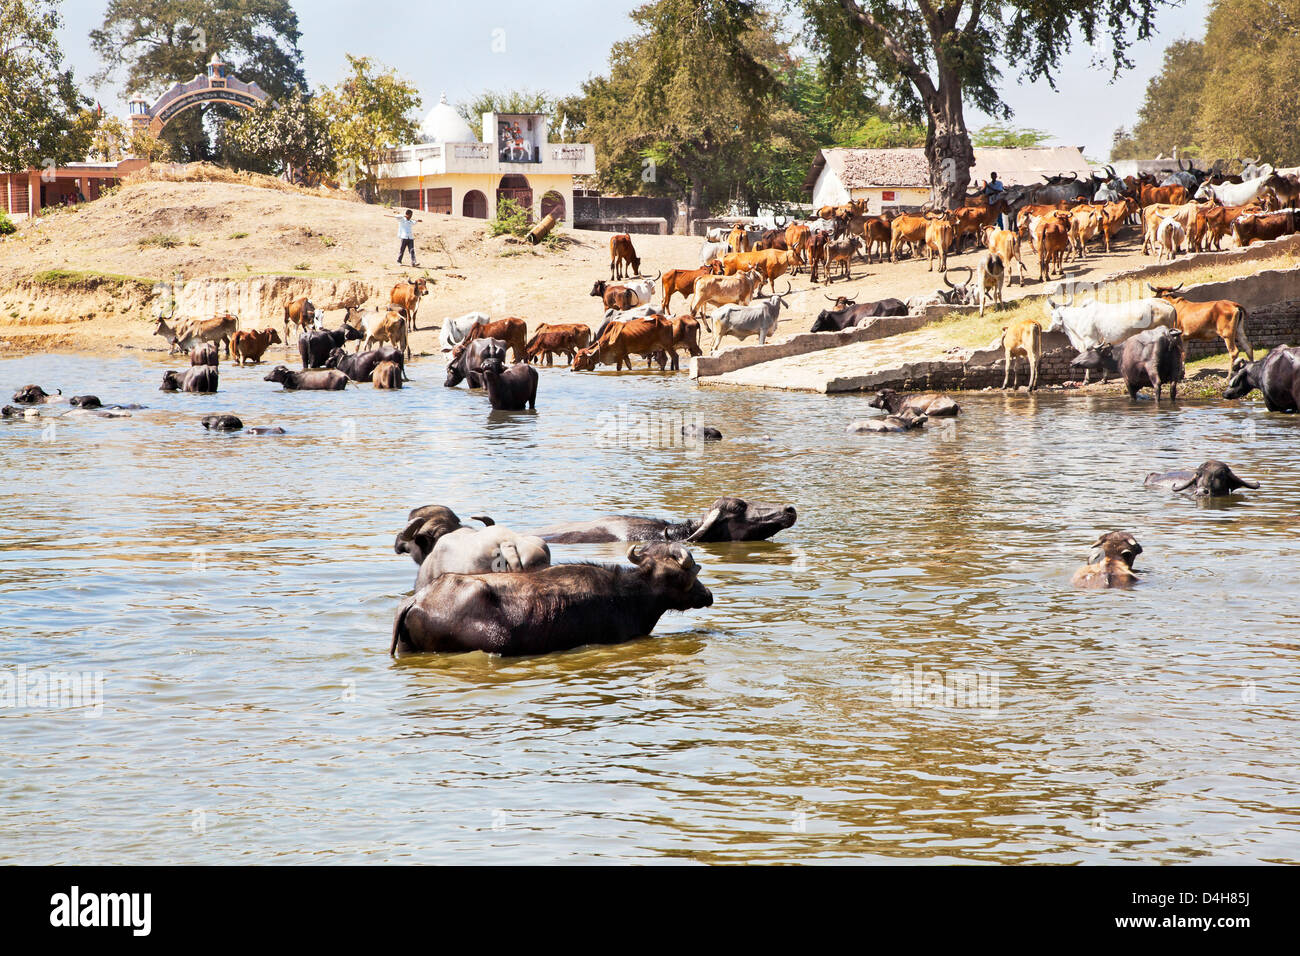 Gujarat rural countryside of India of cattle coming to water and bathe, cool down from baking hot sun herded by herdsman Stock Photo